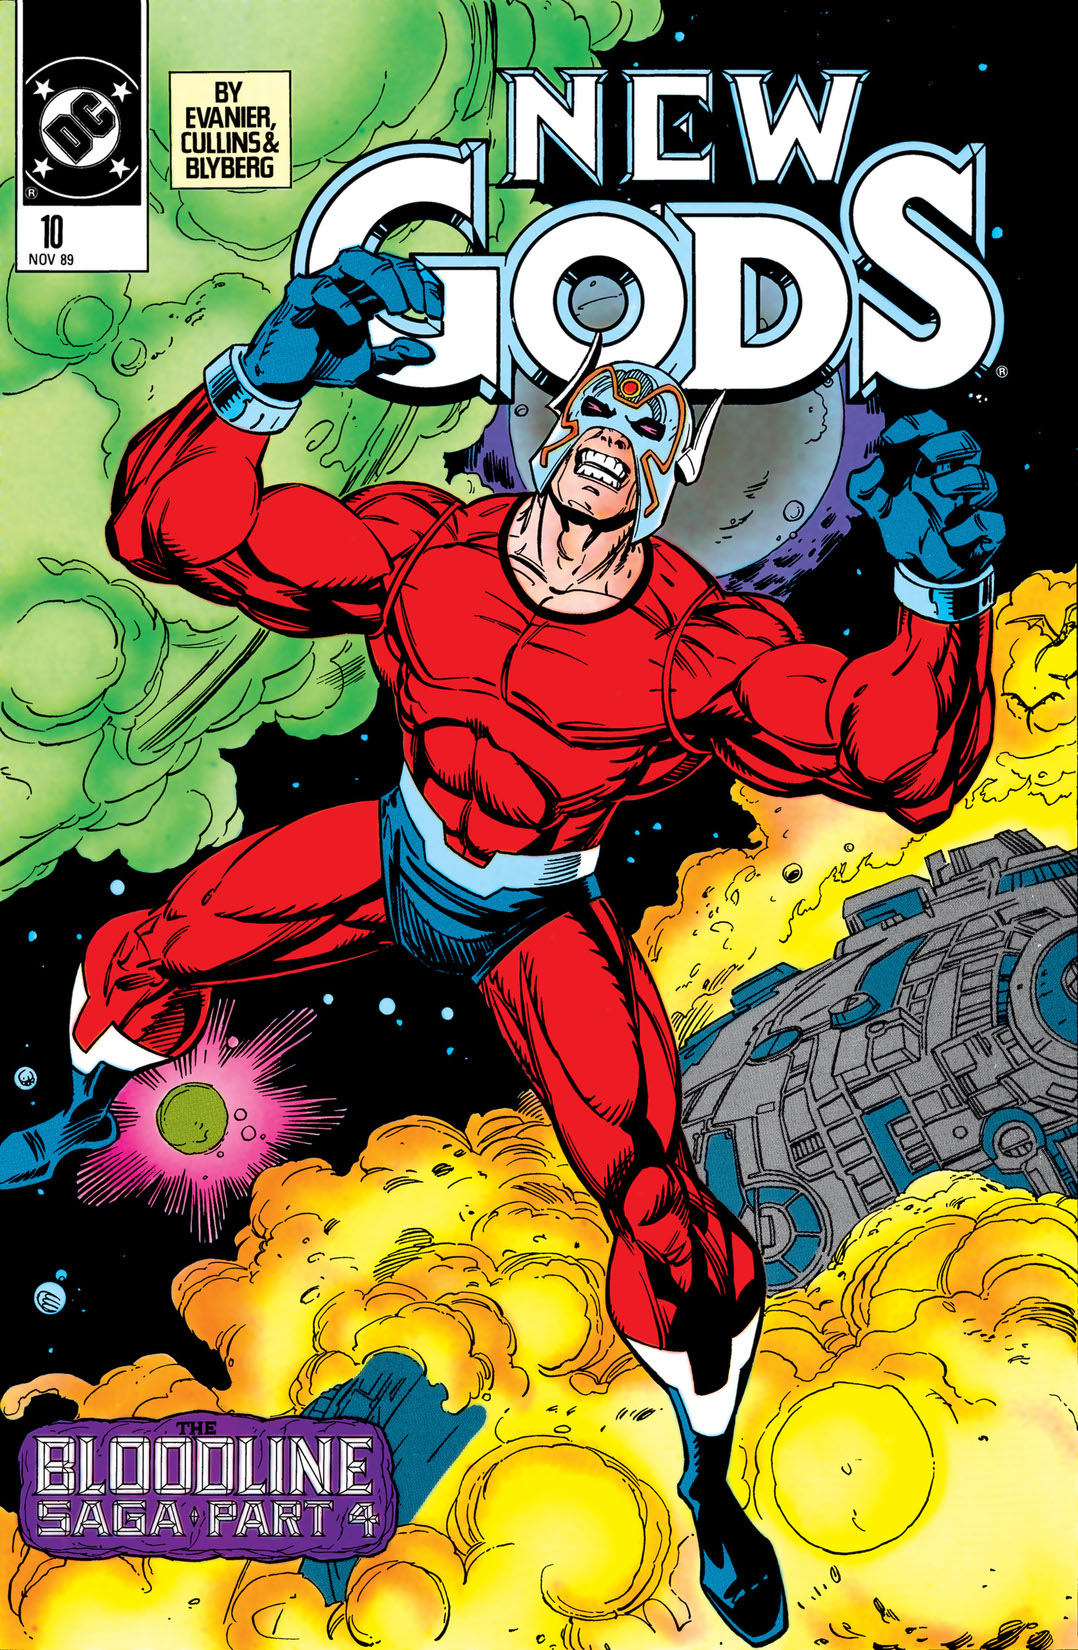 New Gods (1989-) #10 preview images